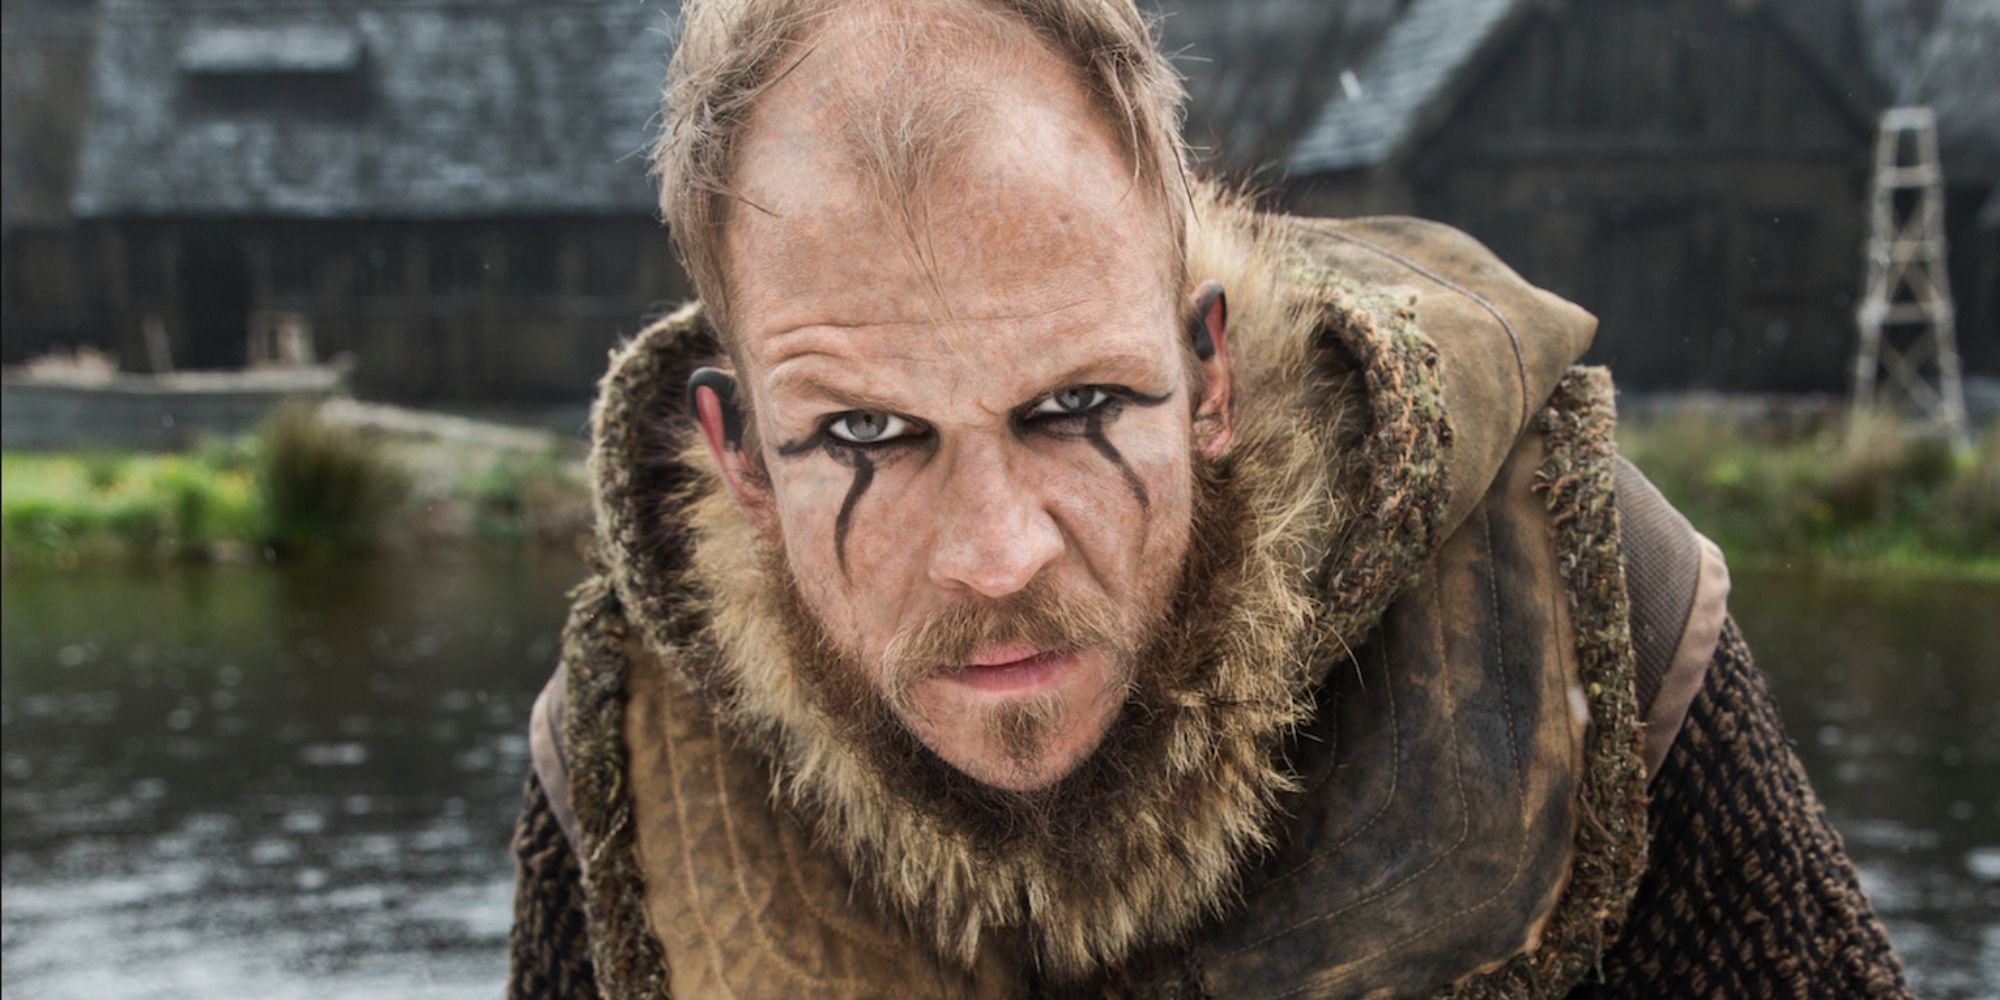 Floki with war paint staring into camera